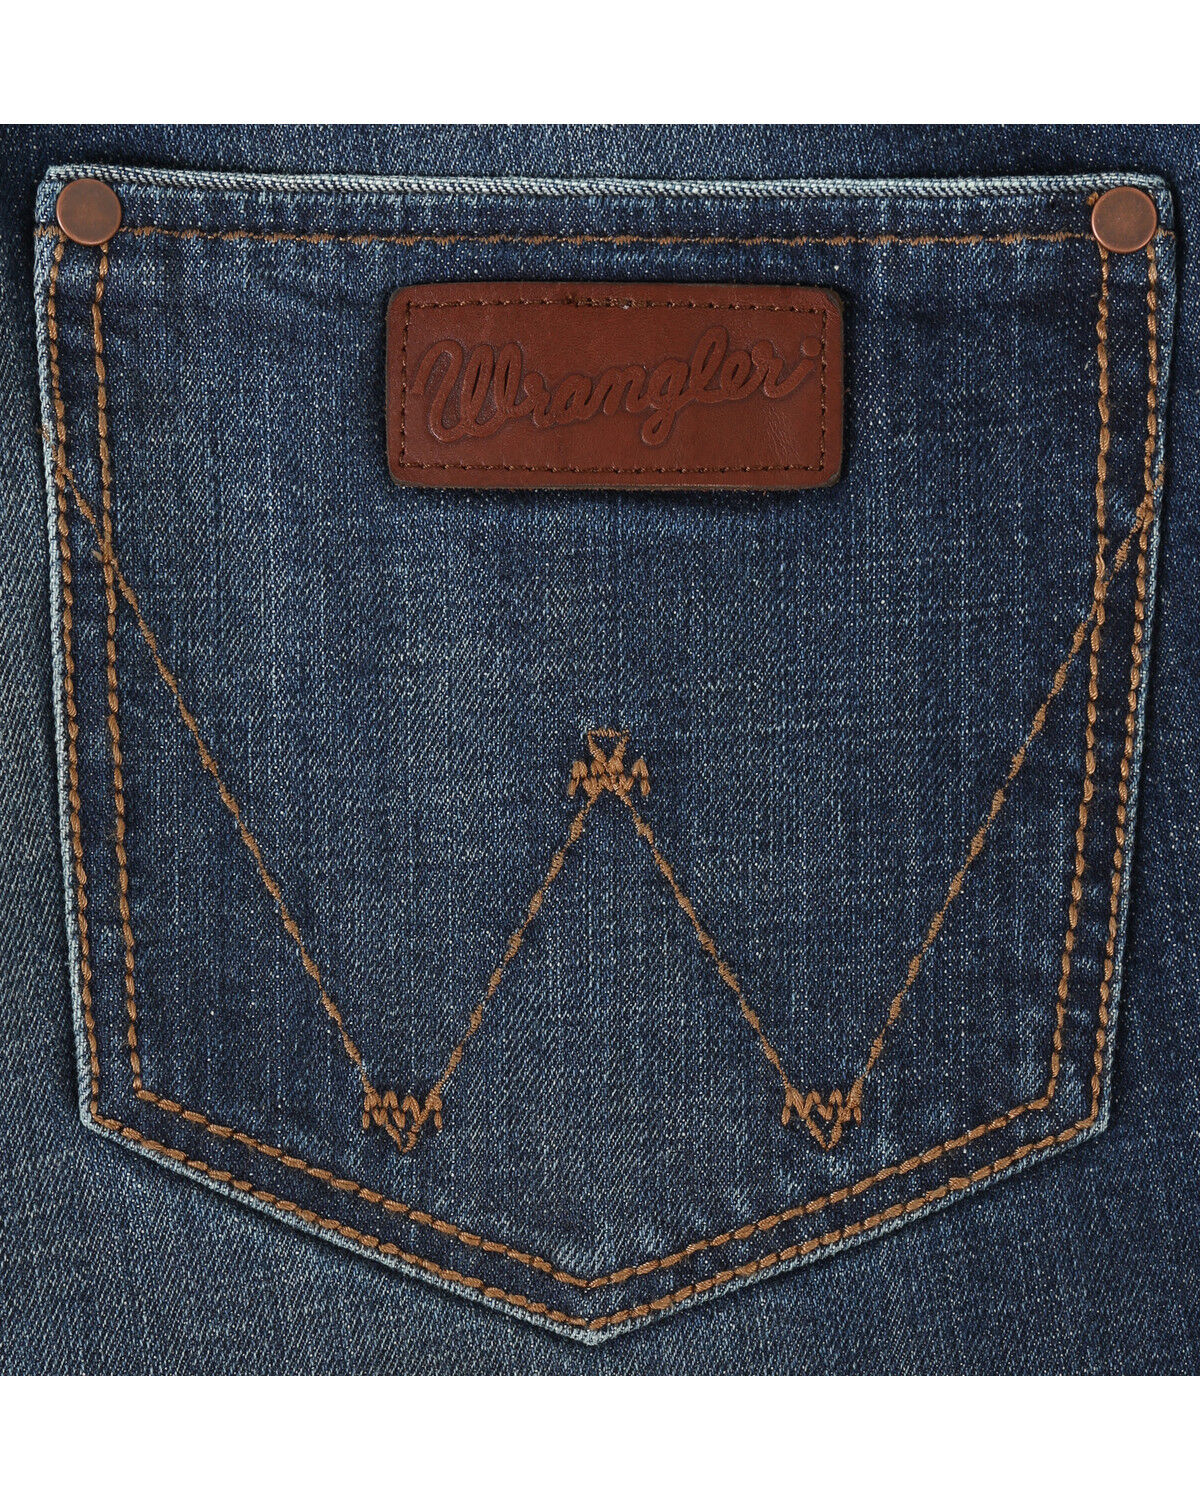 wrangler relaxed fit bootcut